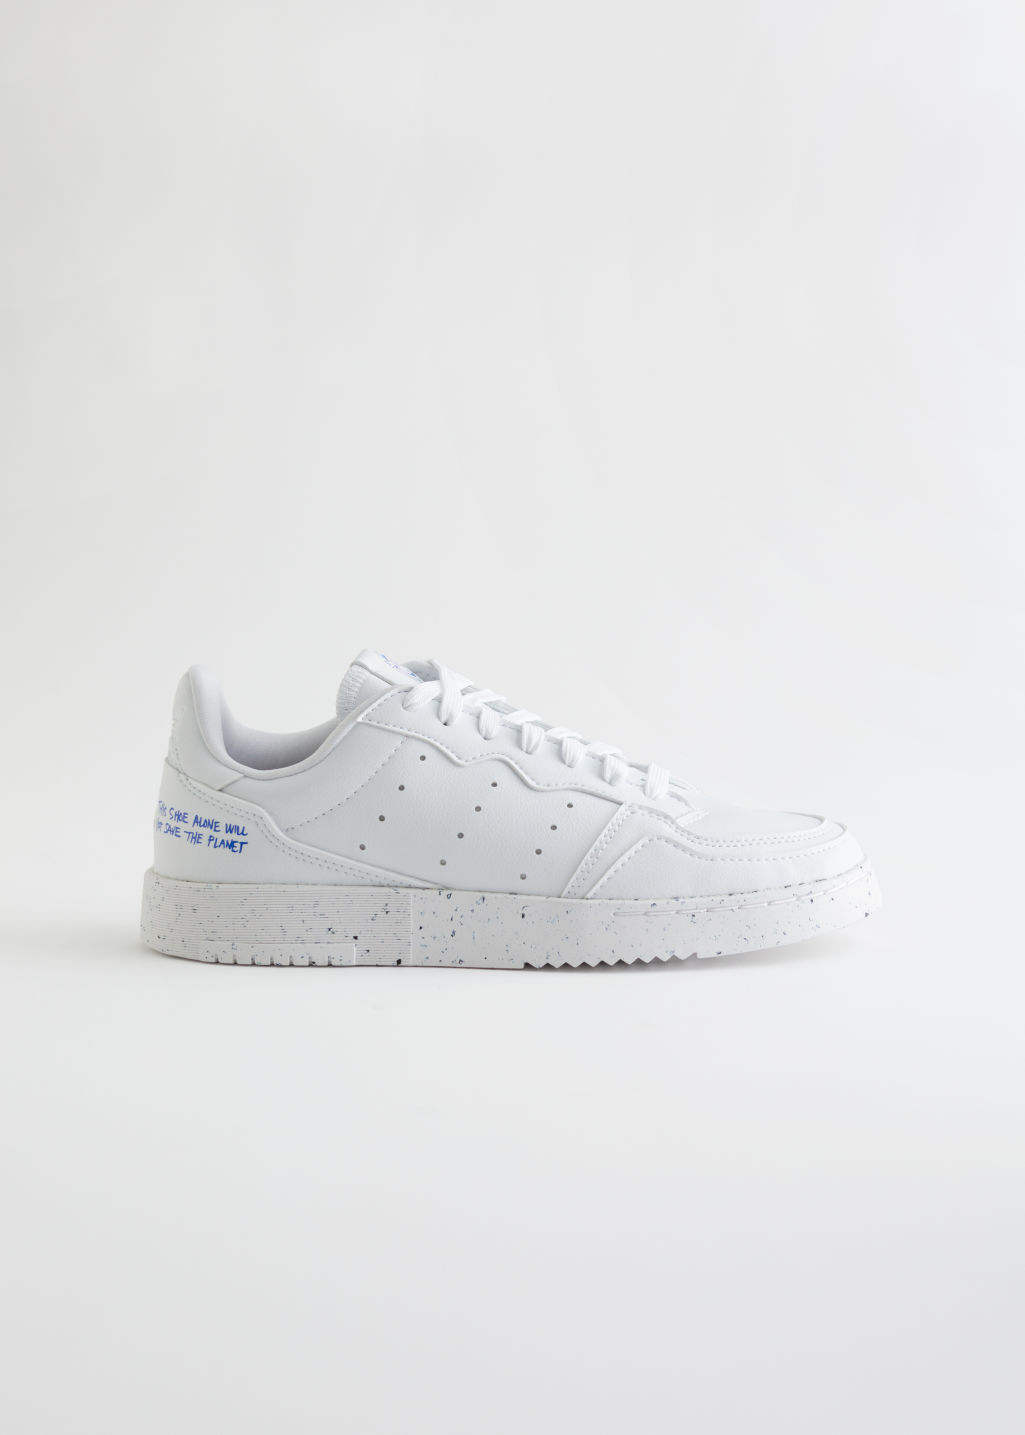 adidas Supercourt - White, Blue - Adidas - & Other Stories - Click Image to Close